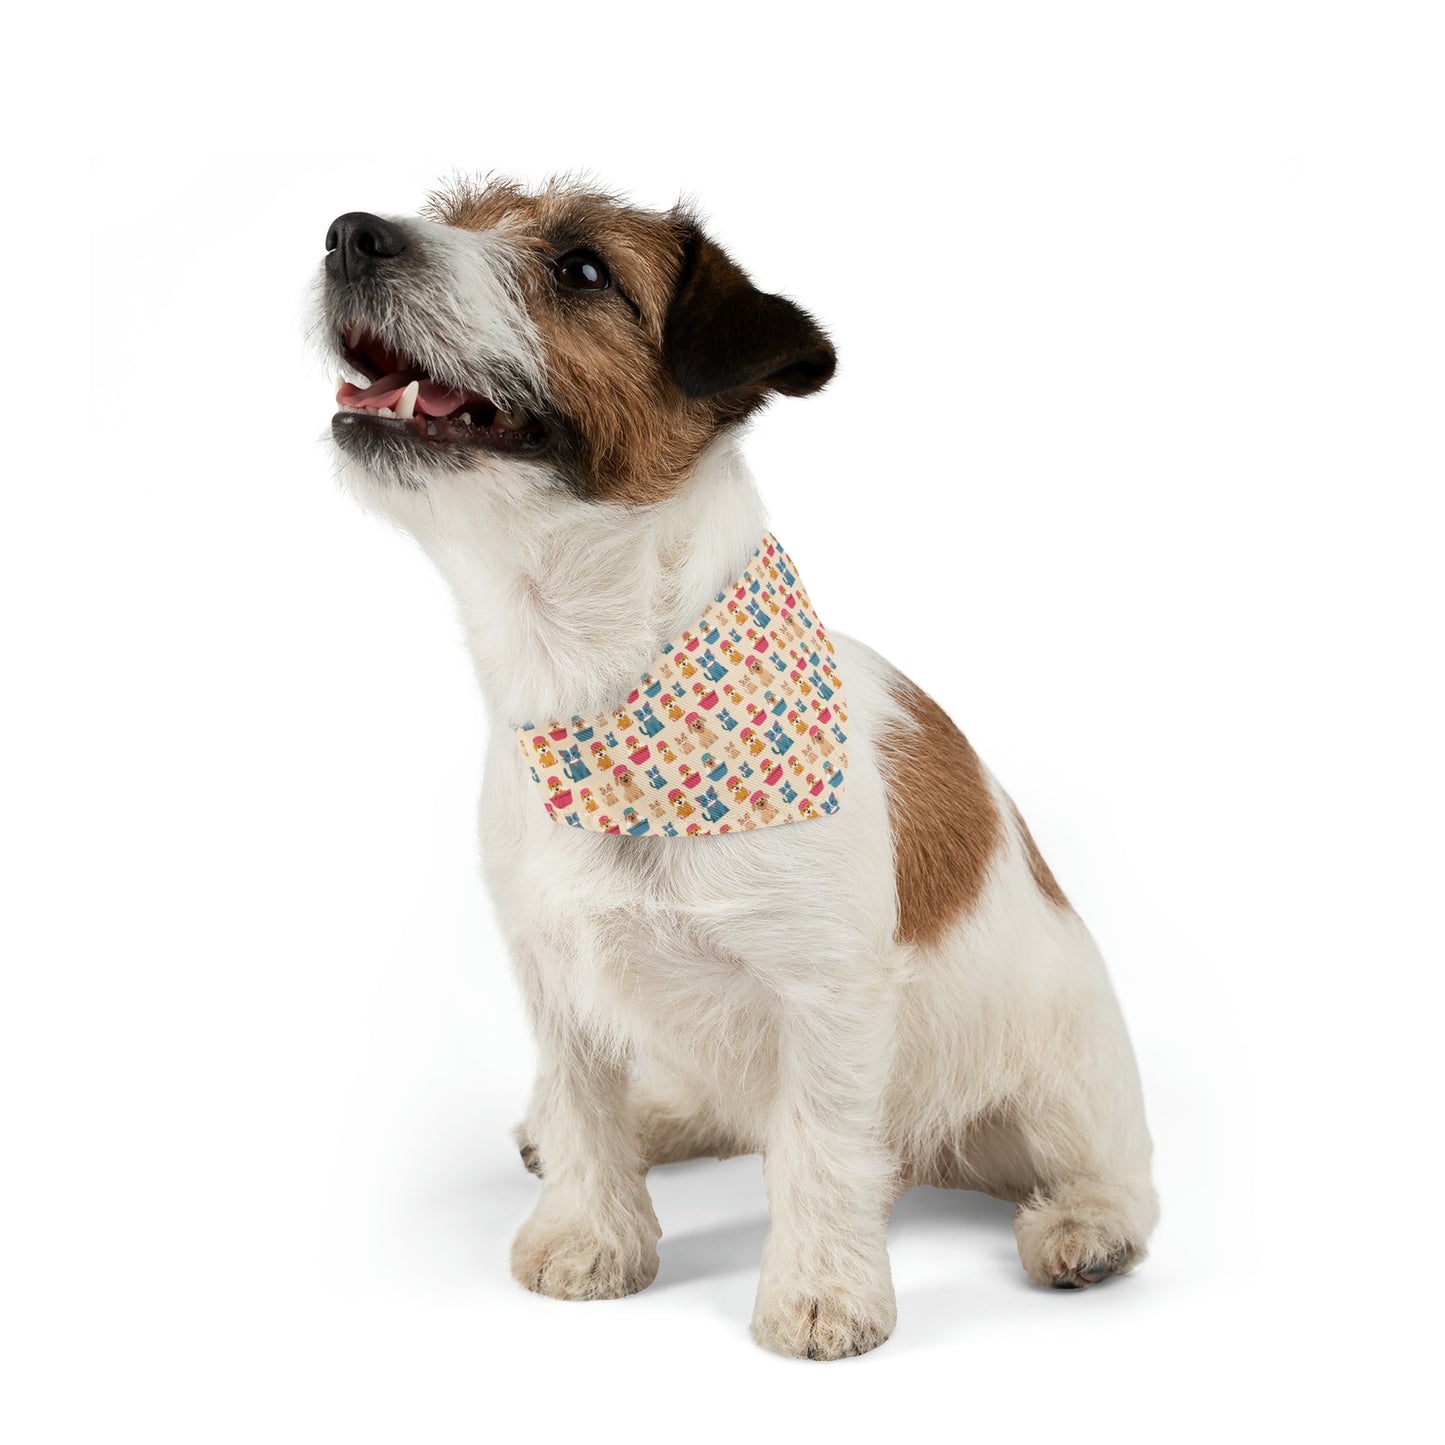 Niccie's Charming Dog Bandana Collar for Adorable Pets Cute Dog Patterns